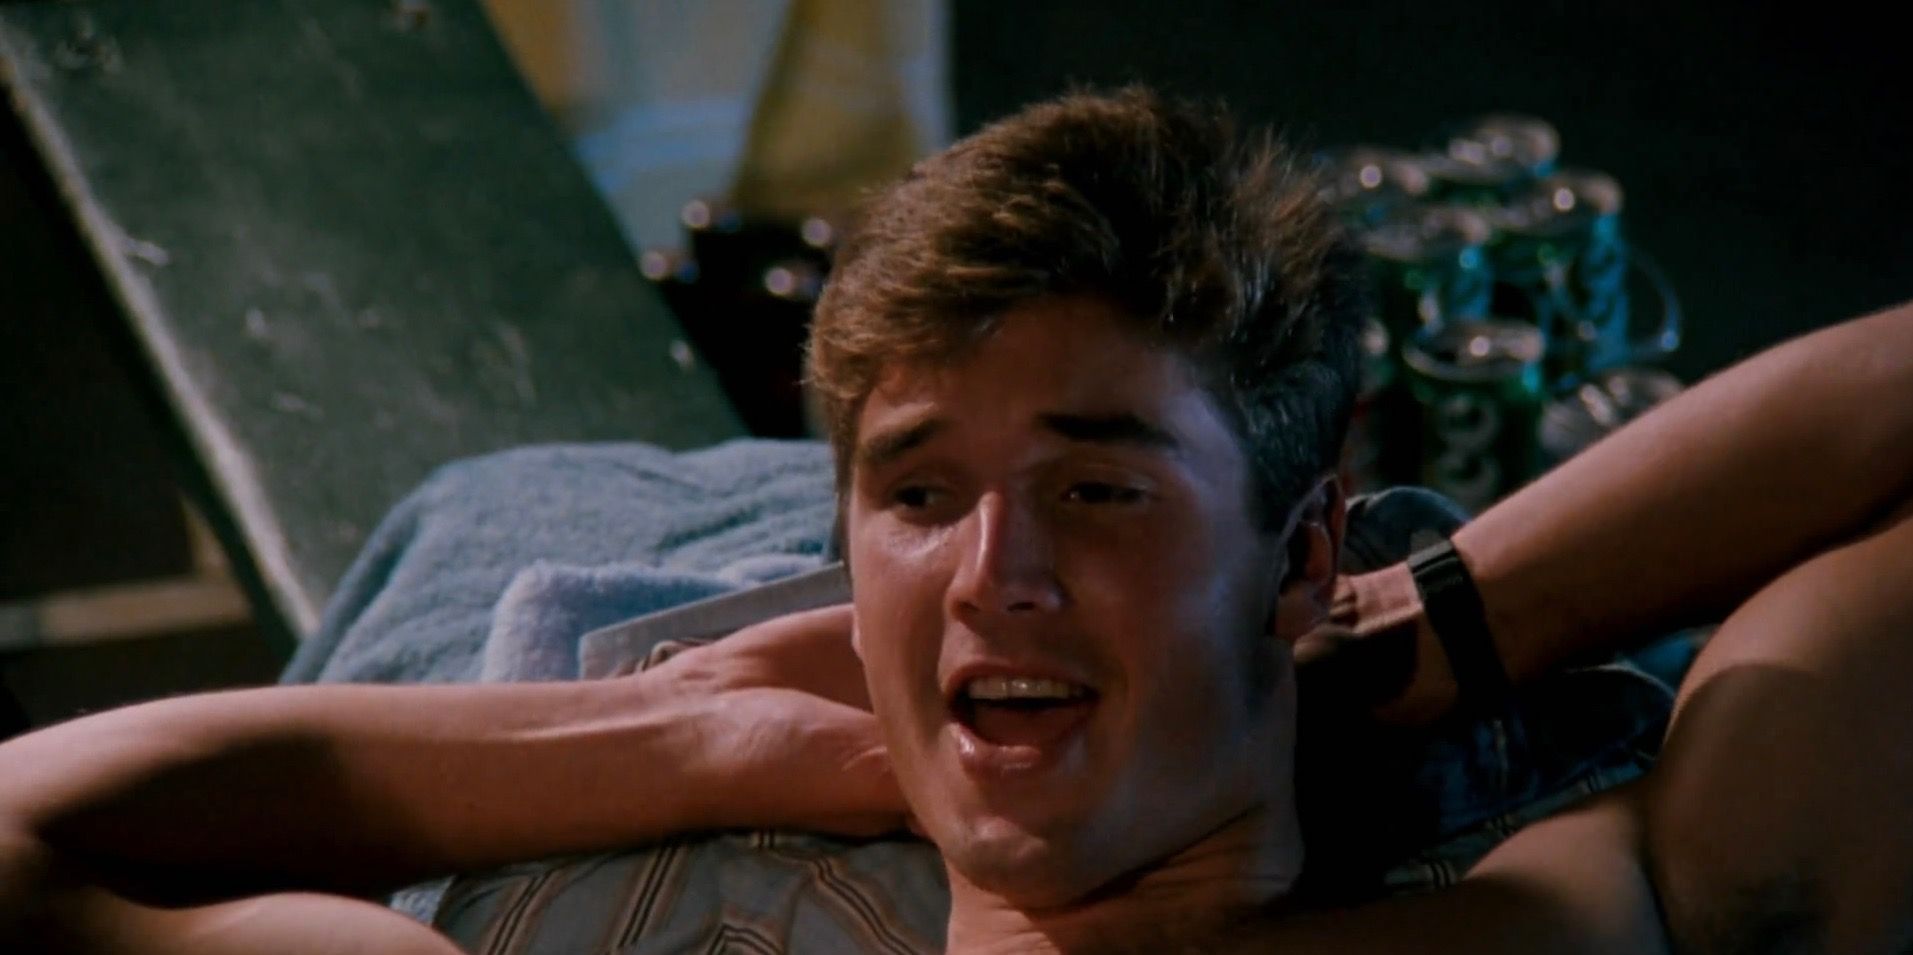 Danny Hassel as Dan in A Nightmare on Elm Street 5 The Dream Child